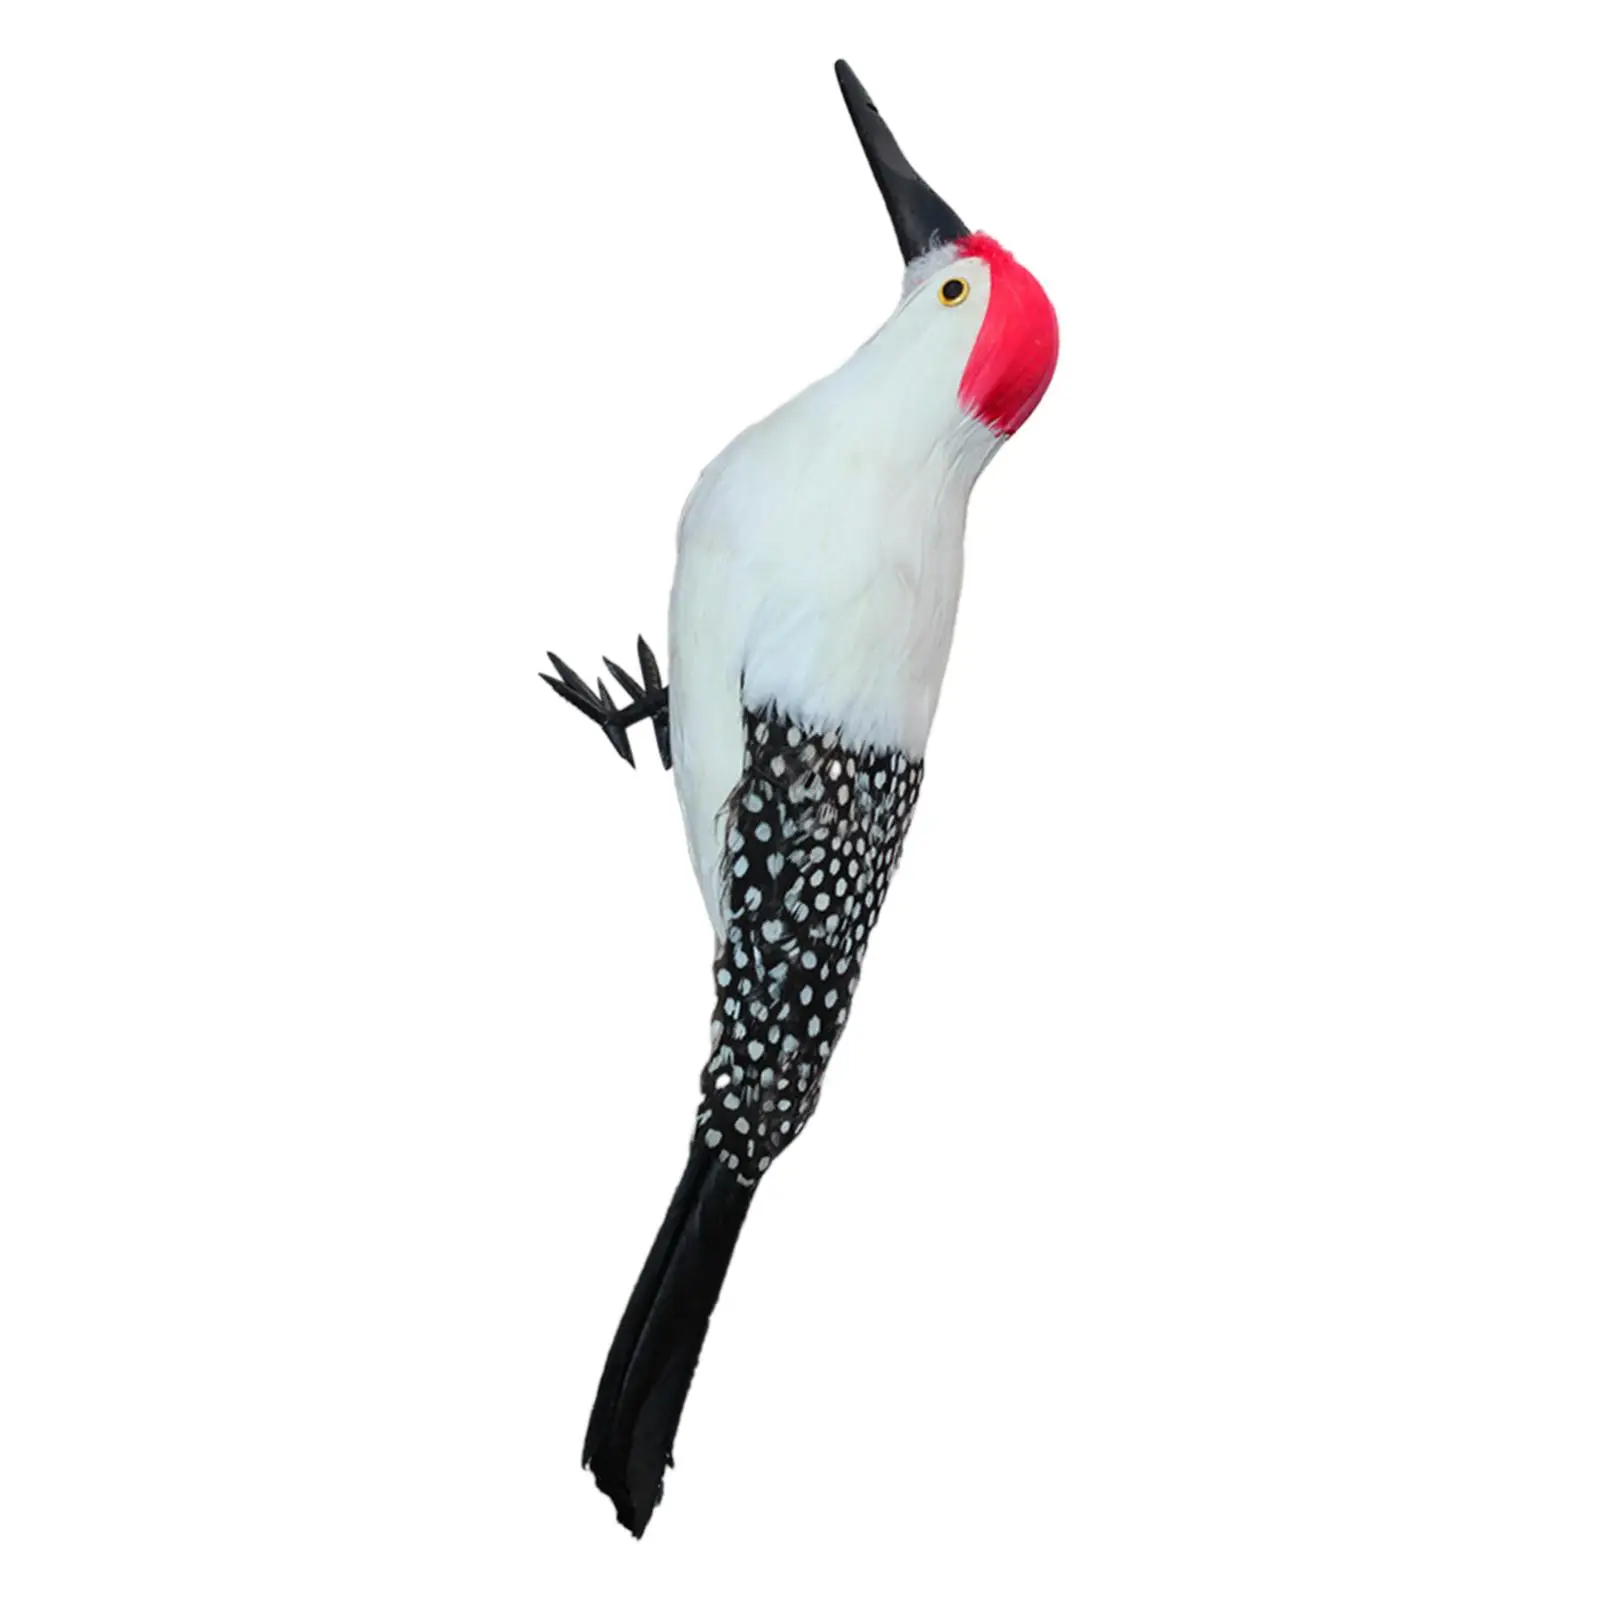 Simulation Woodpecker Spring Toys Handcrafted Outdoor Art Faux Cute Art Gift Decor Model for Home Garden Yard Patio Outdoor